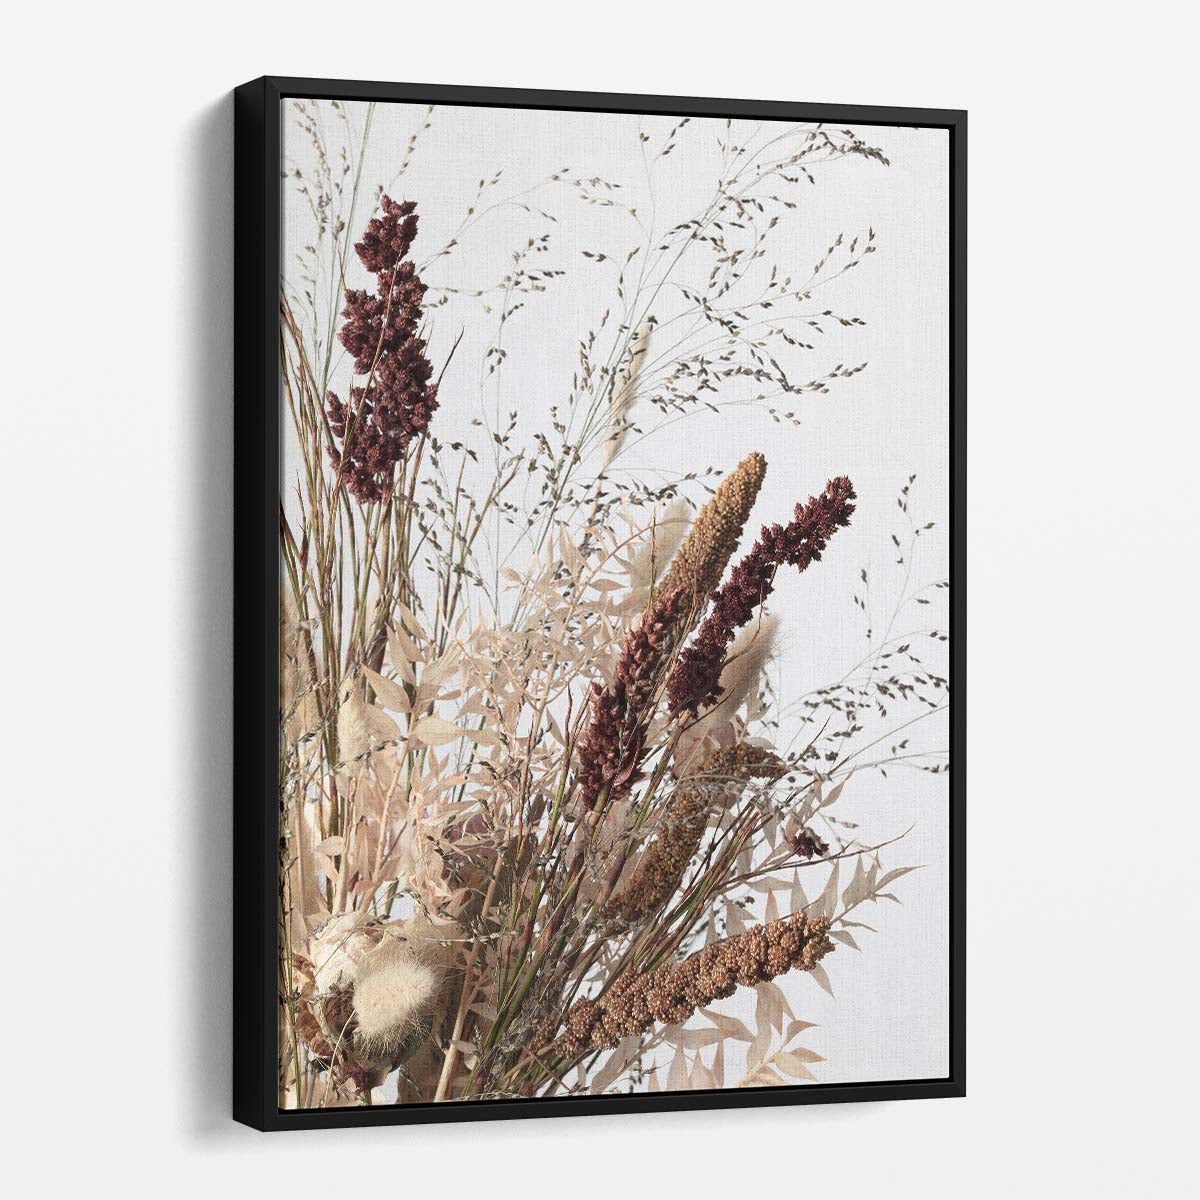 Botanical Still Life Photography Withered Floral Bouquet Studio Art by Luxuriance Designs, made in USA